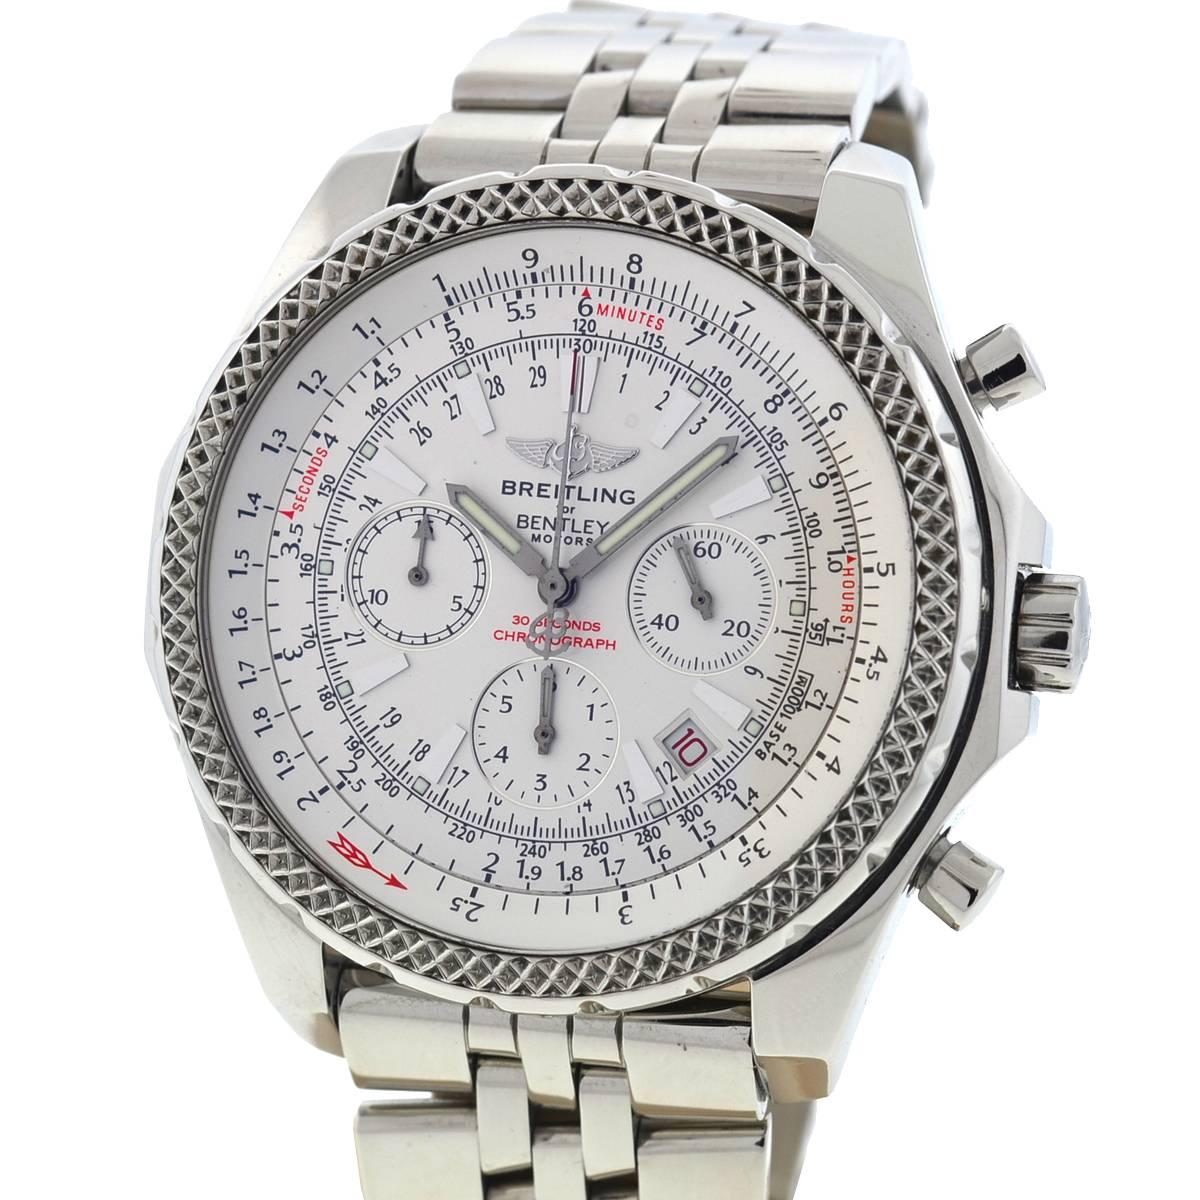 Company - Breitling
Style - Luxury Sport Watch
Model - Bentley 30 Seconds
Reference Number - A25362 
Case Metal - Stainless Steel
Case Measurement - 48 mm
Bracelet - Stainless Steel with Deployment Clasp
Dial - White
Bezel - Stainless Steel
Crystal